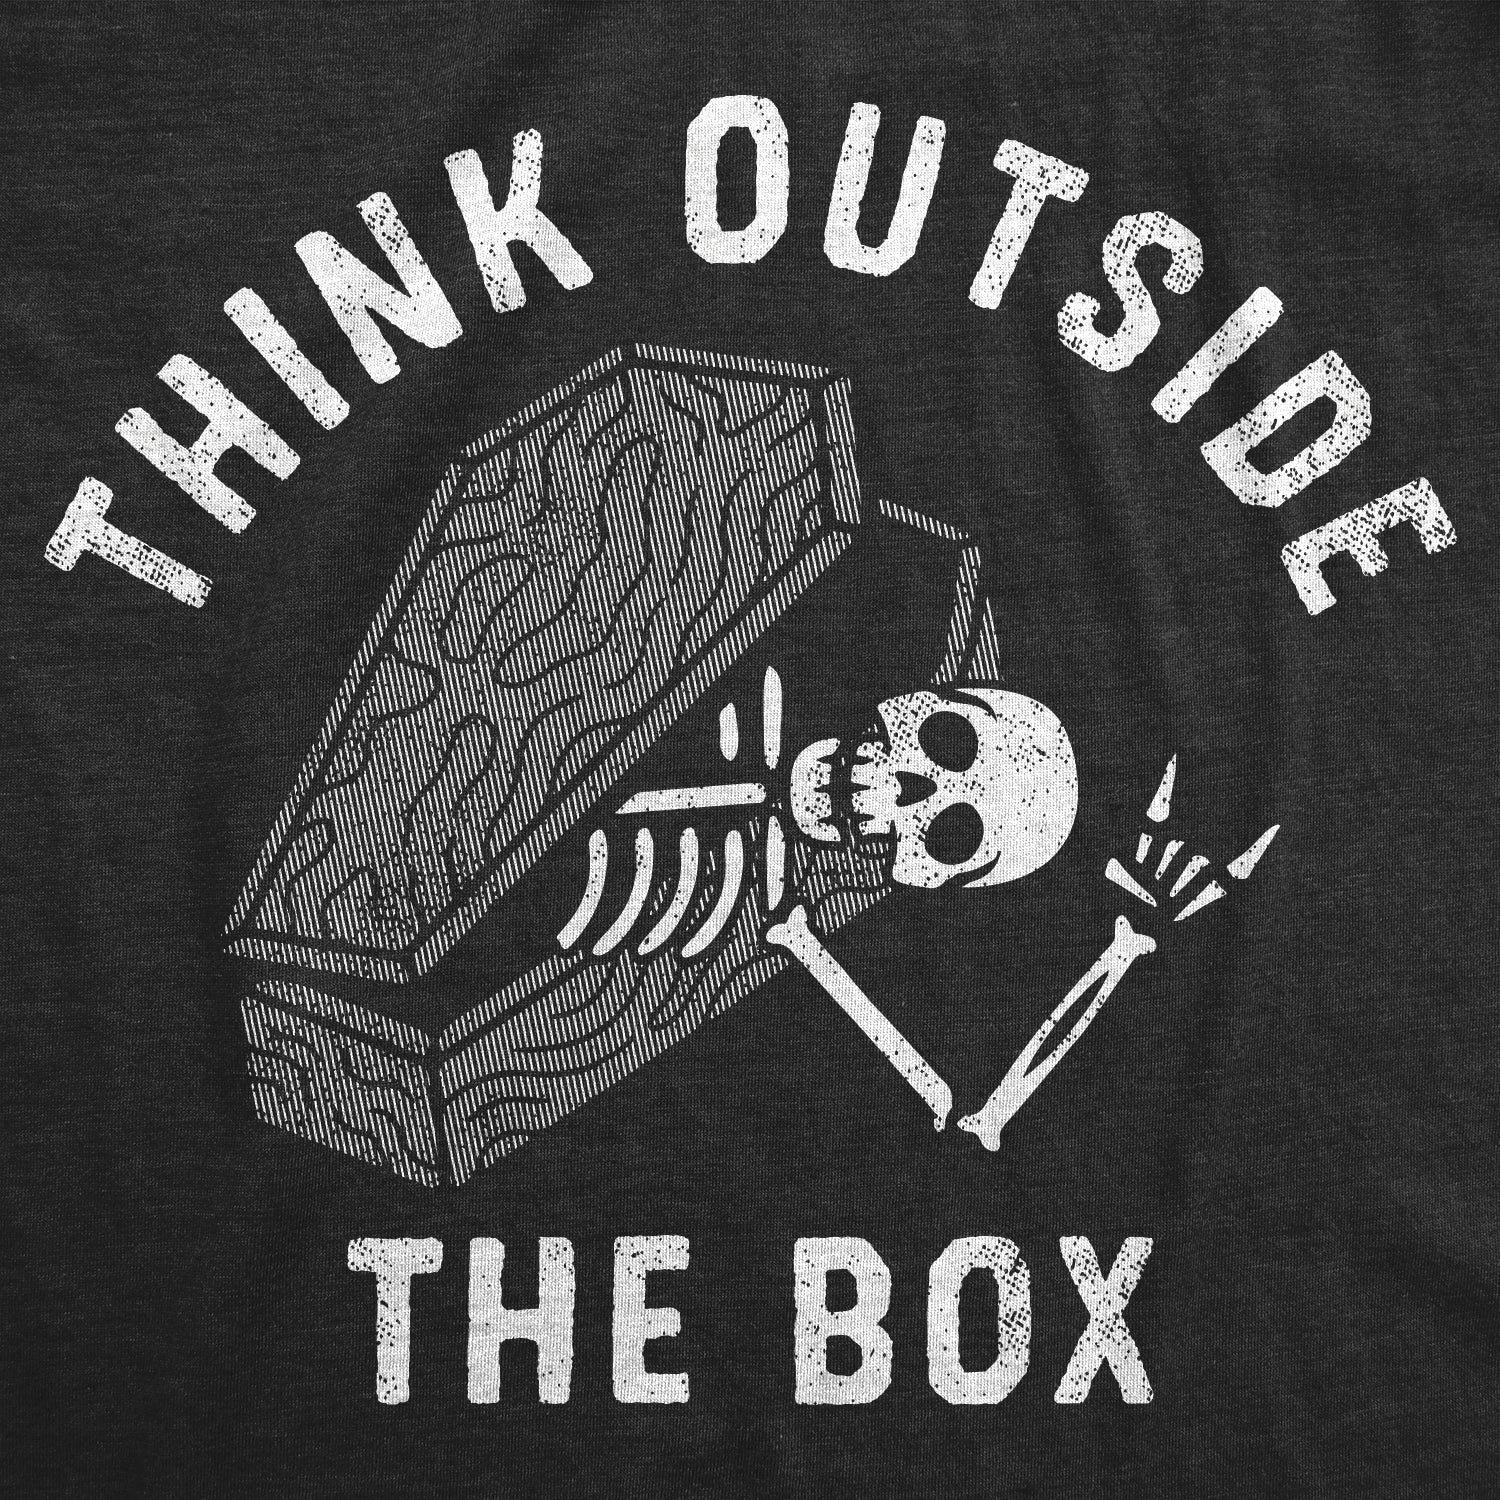 Funny Heather Black - BOX Think Outside The Box Coffin Mens T Shirt Nerdy Halloween Sarcastic Tee